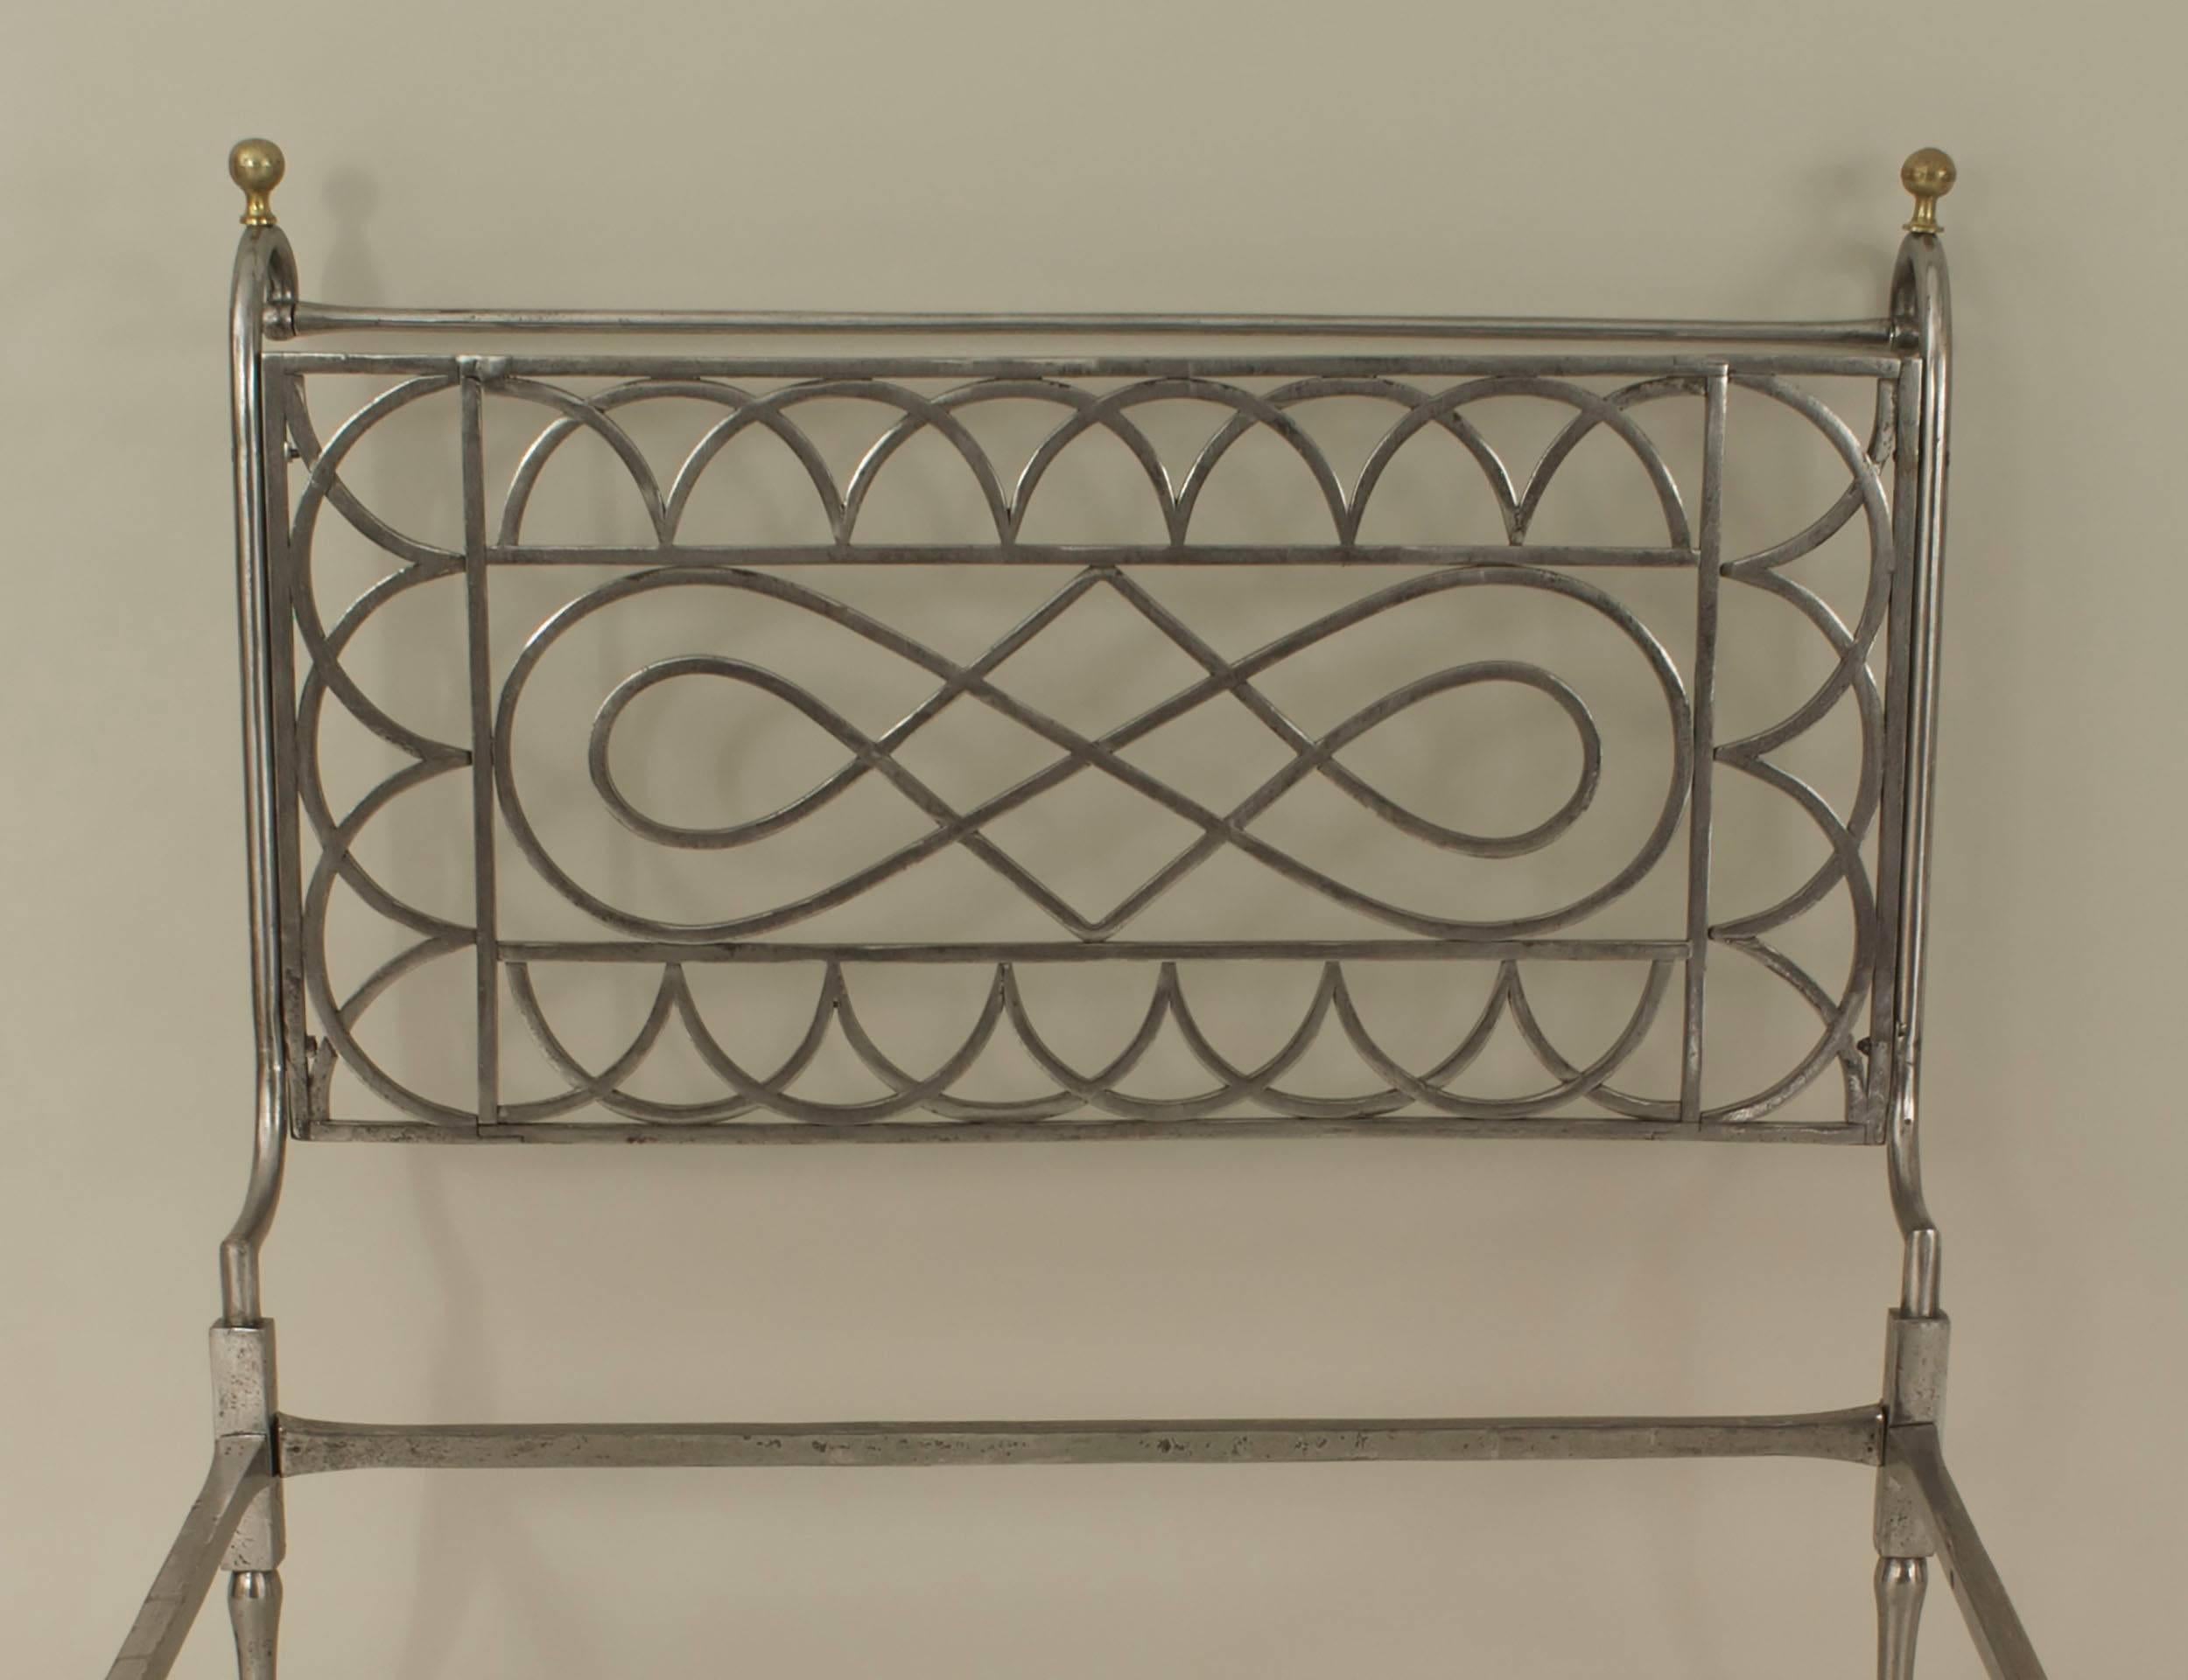 French Empire-style (19/20th Century) steel and brass trimmed daybed with open arch and scroll design sides
